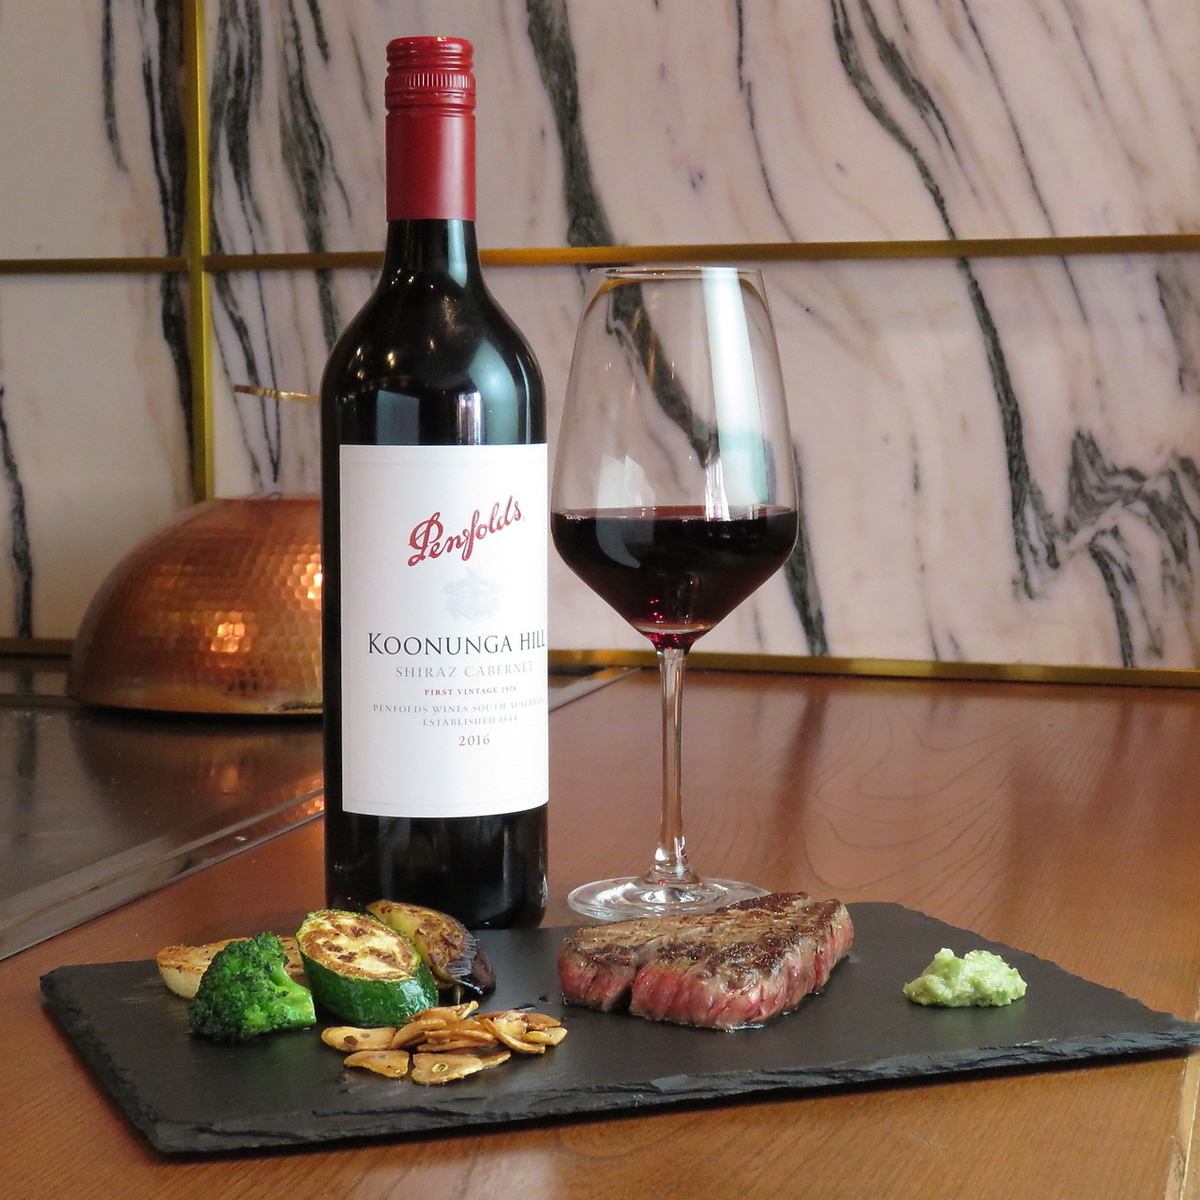 Steak cooked in front of you.And wine selected by the owner.